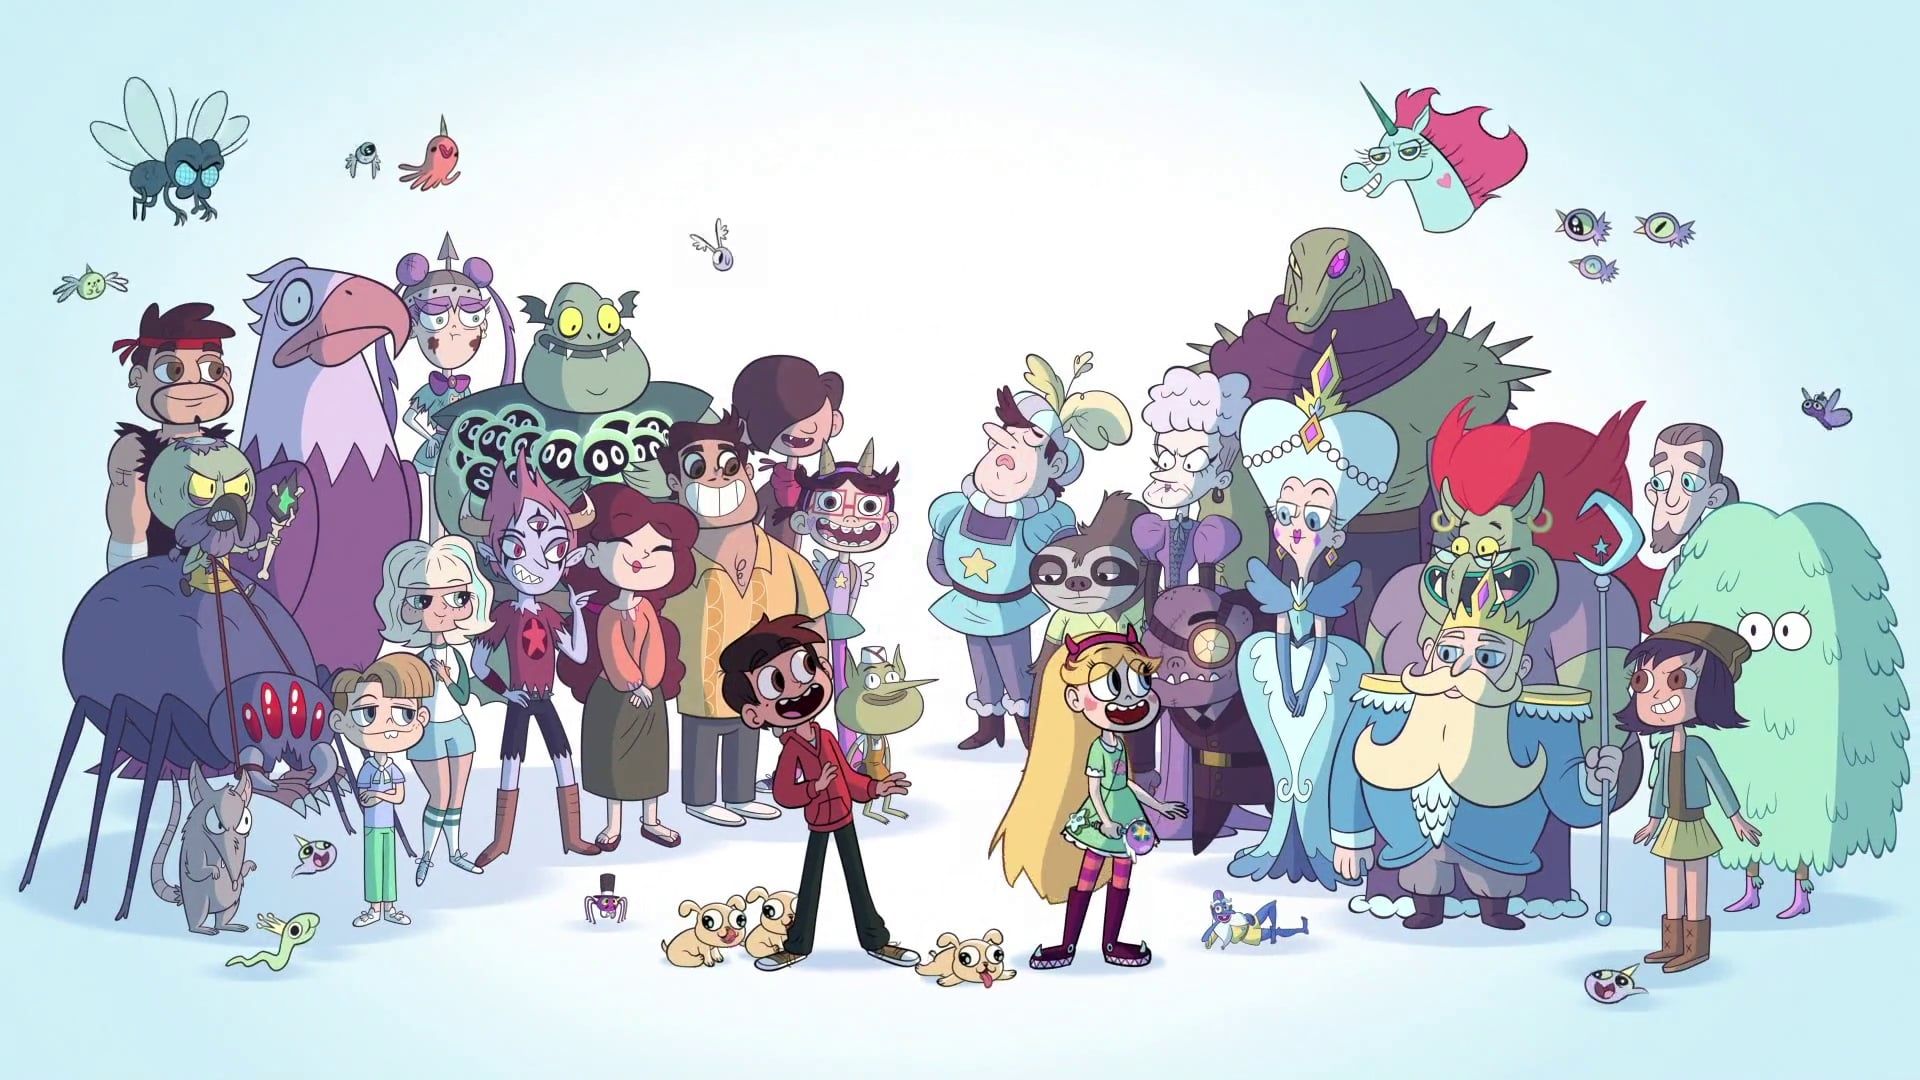 Star vs. the Forces of Evil Backdrop